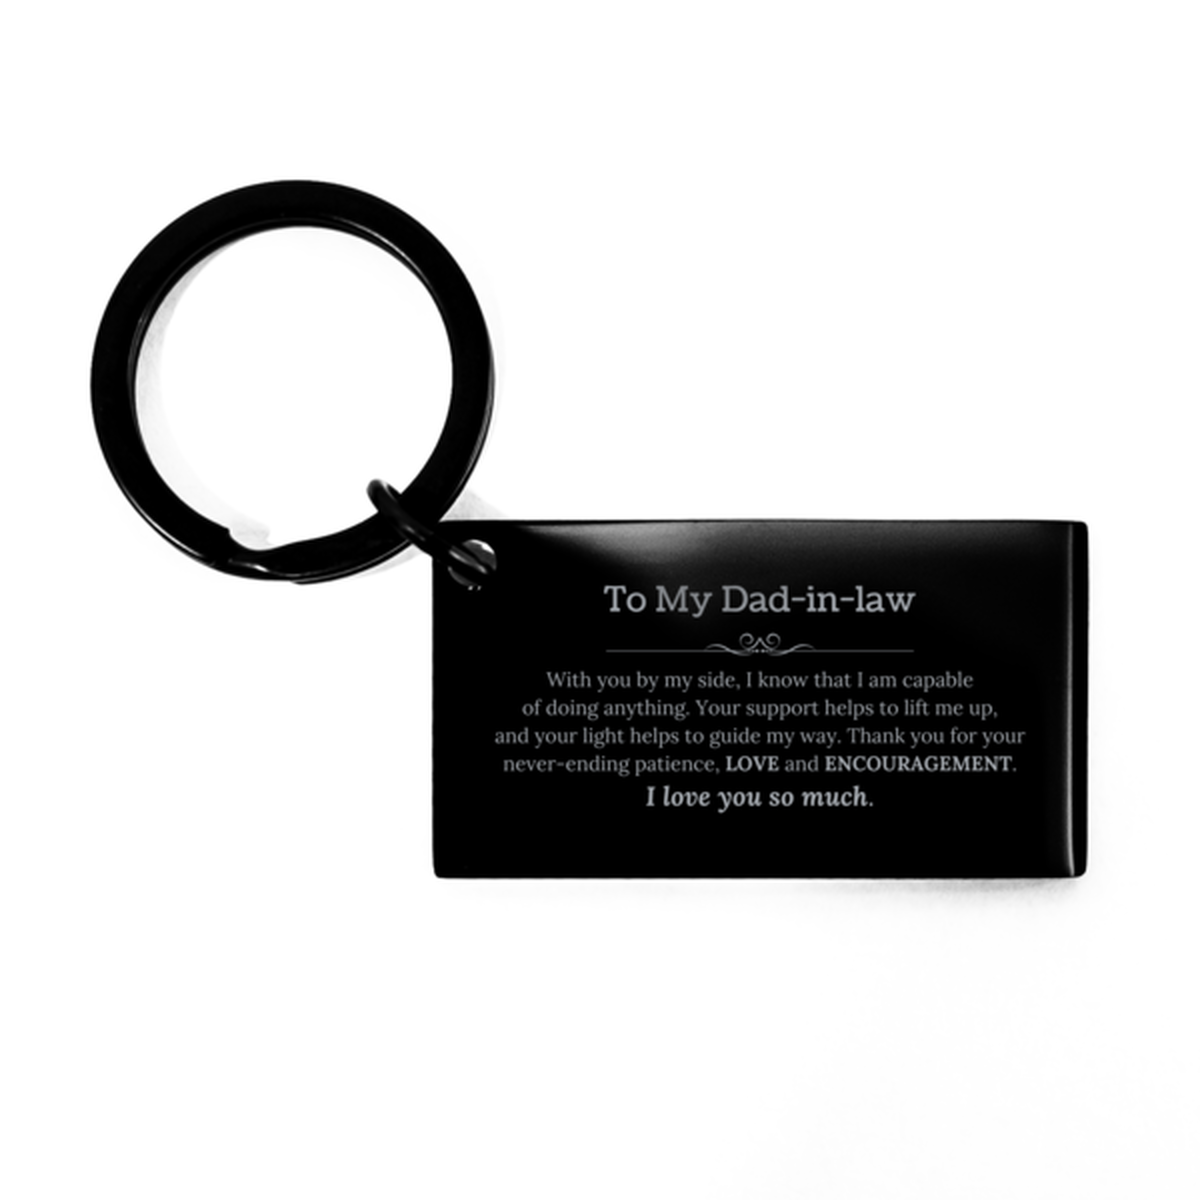 Appreciation Dad-in-law Keychain Gifts, To My Dad-in-law Birthday Christmas Wedding Keepsake Gifts for Dad-in-law With you by my side, I know that I am capable of doing anything. I love you so much